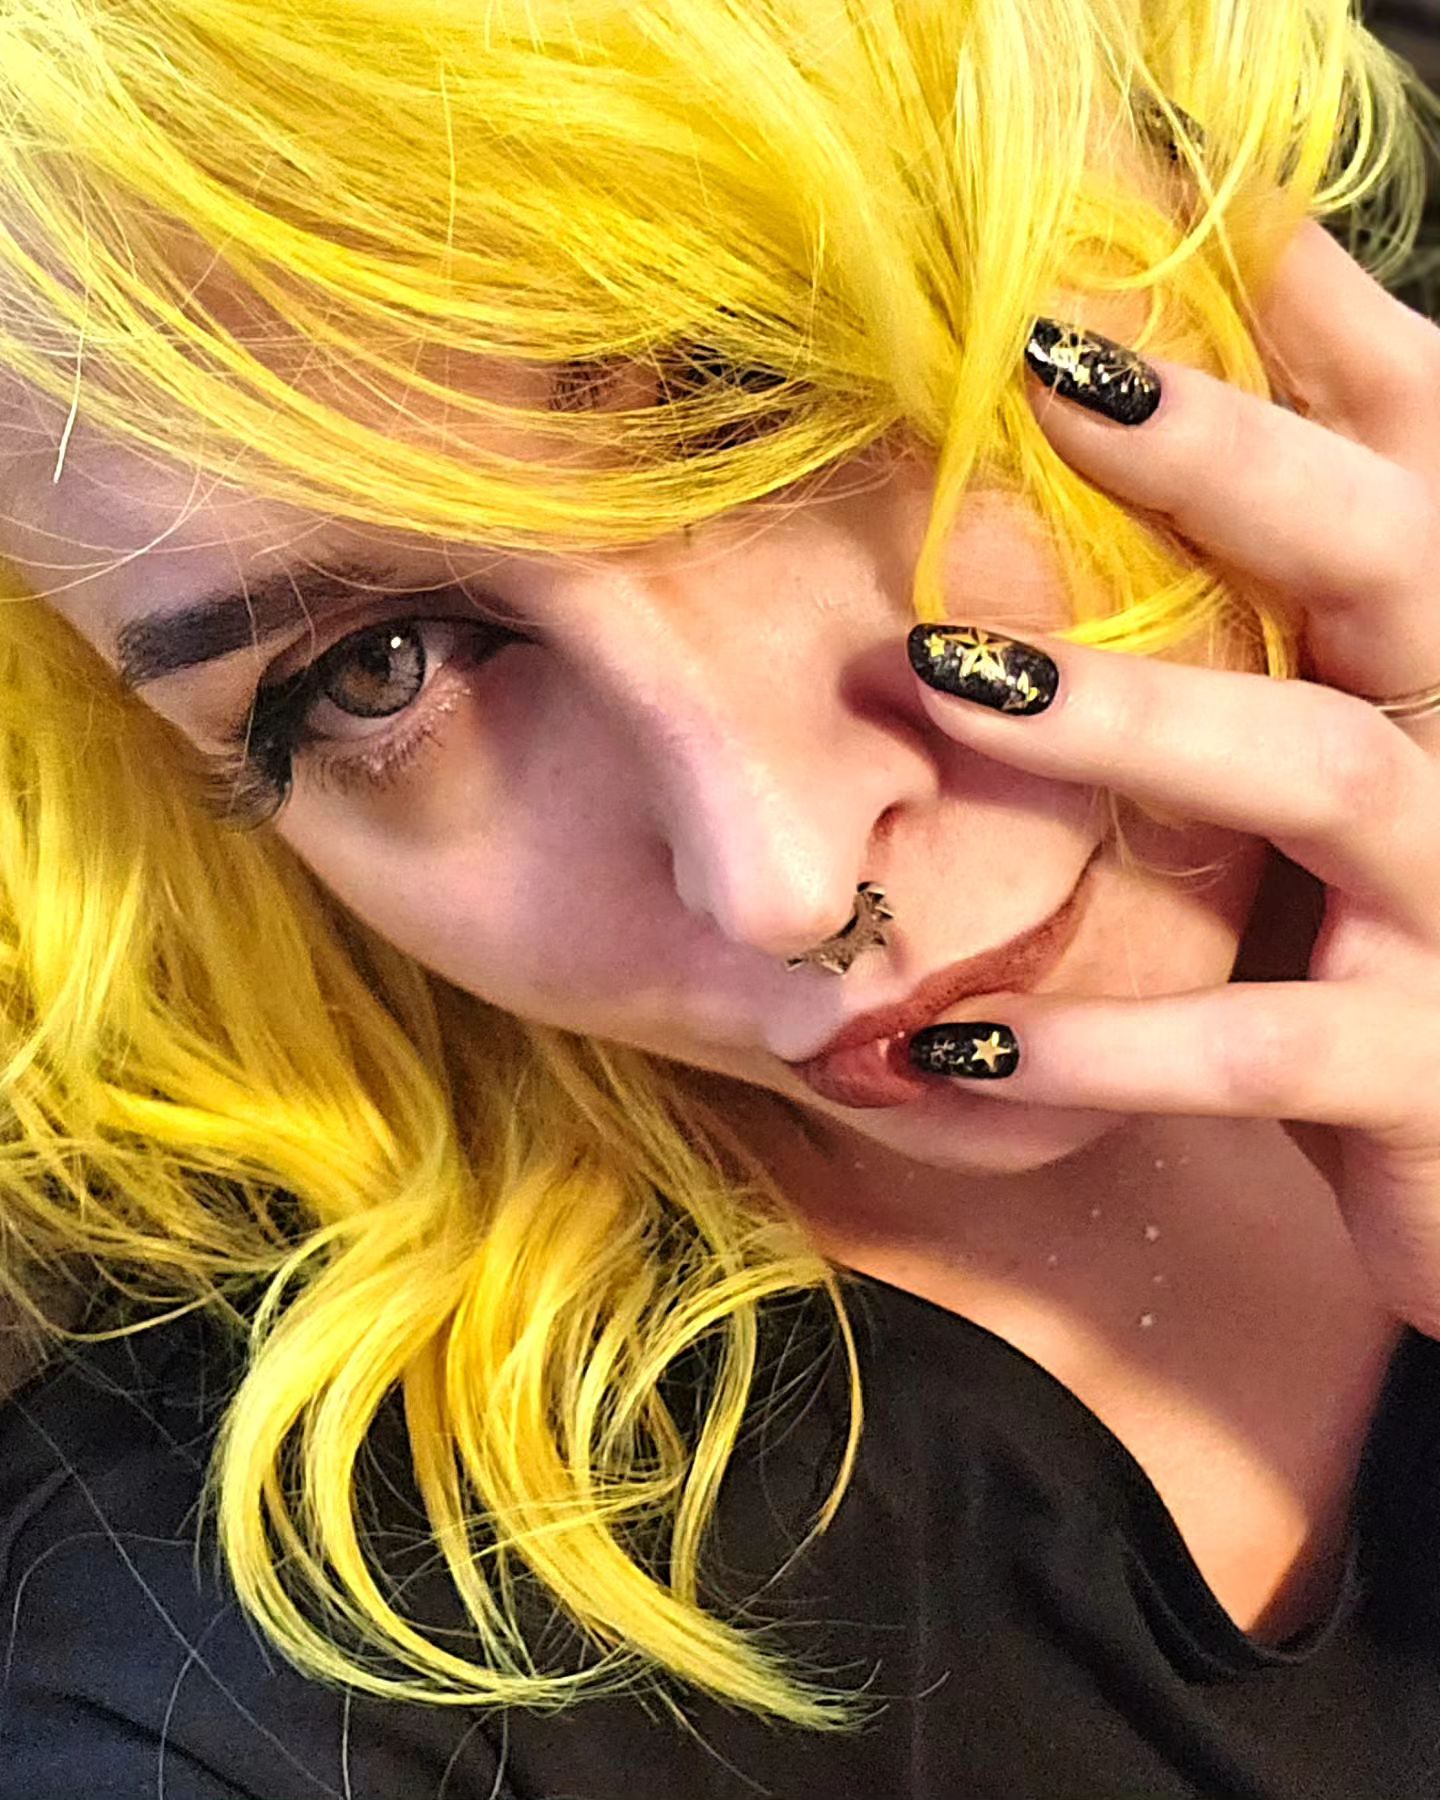 How did you have fun on Halloween?
https://onlyfans.com/night-white-witch
#halloween #makeup #girl #yellowhair #selfie #onlyfansmodel #model #mood #outfit